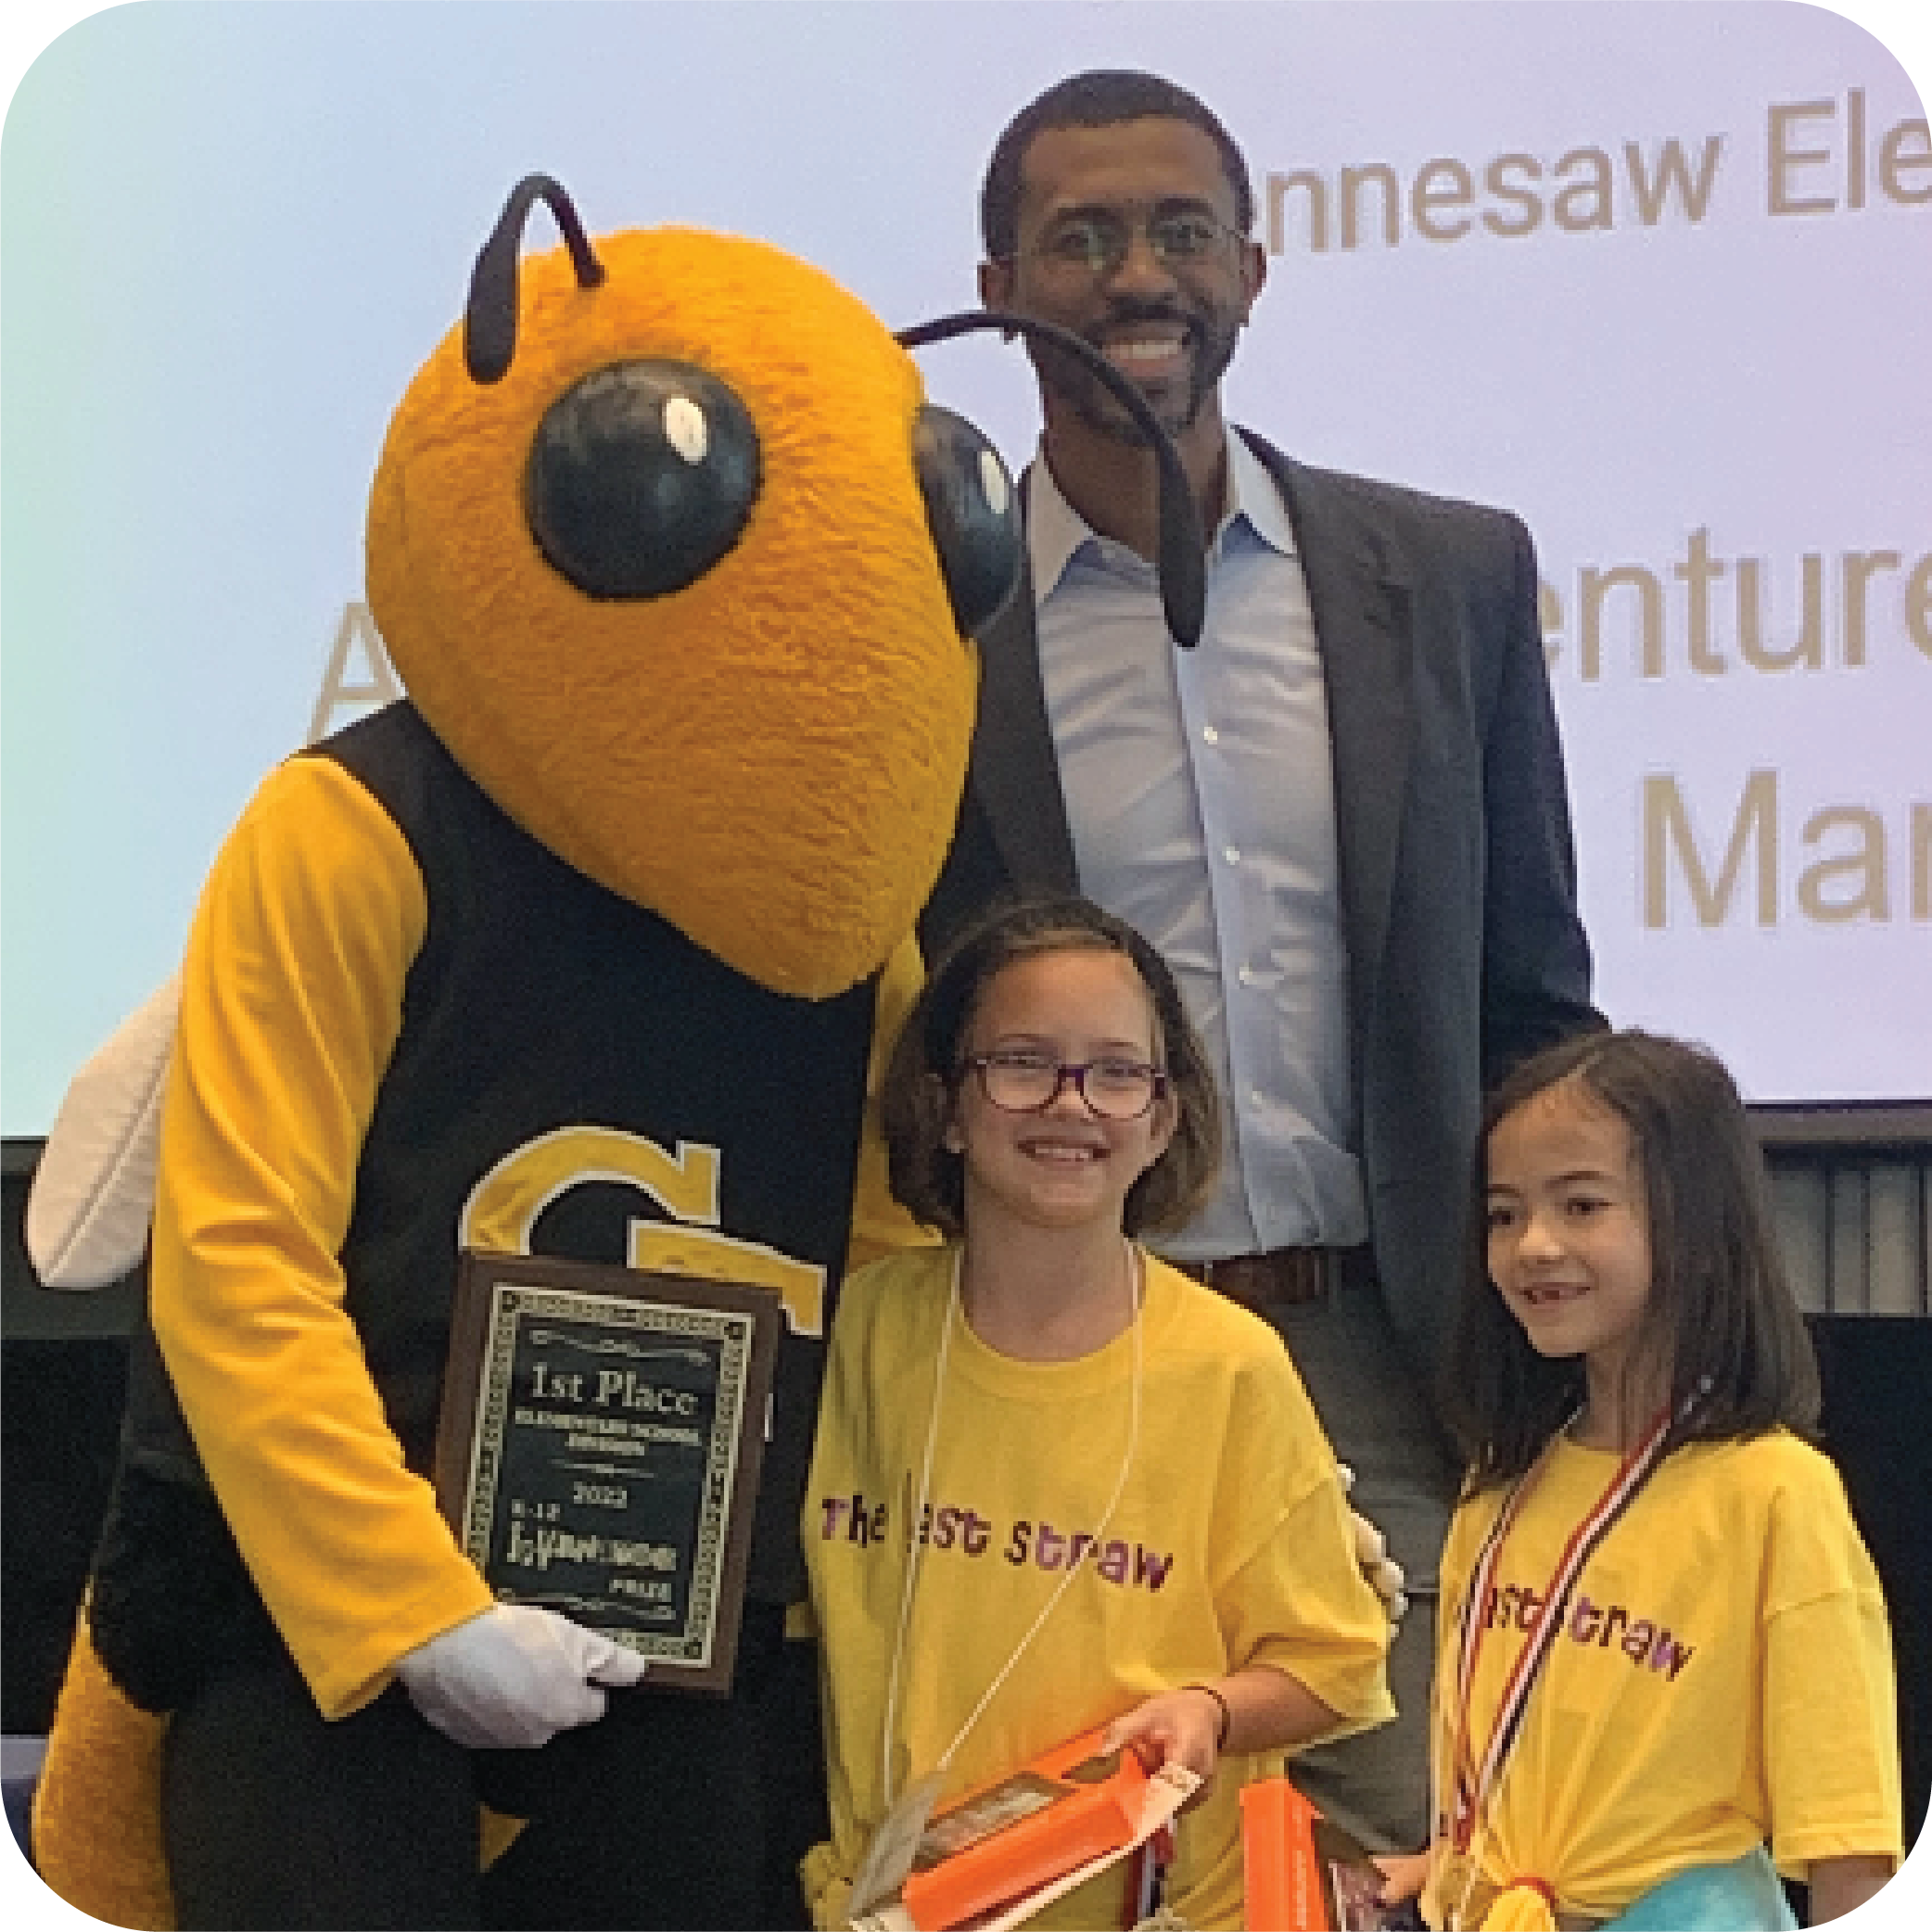 Two smiling students holding prizes and standing next to Buzz (Georgia Tech's yellowjacket mascot) holding a plaque and Craig Cupid (Georgia Intellectual Property and Alliance representative).